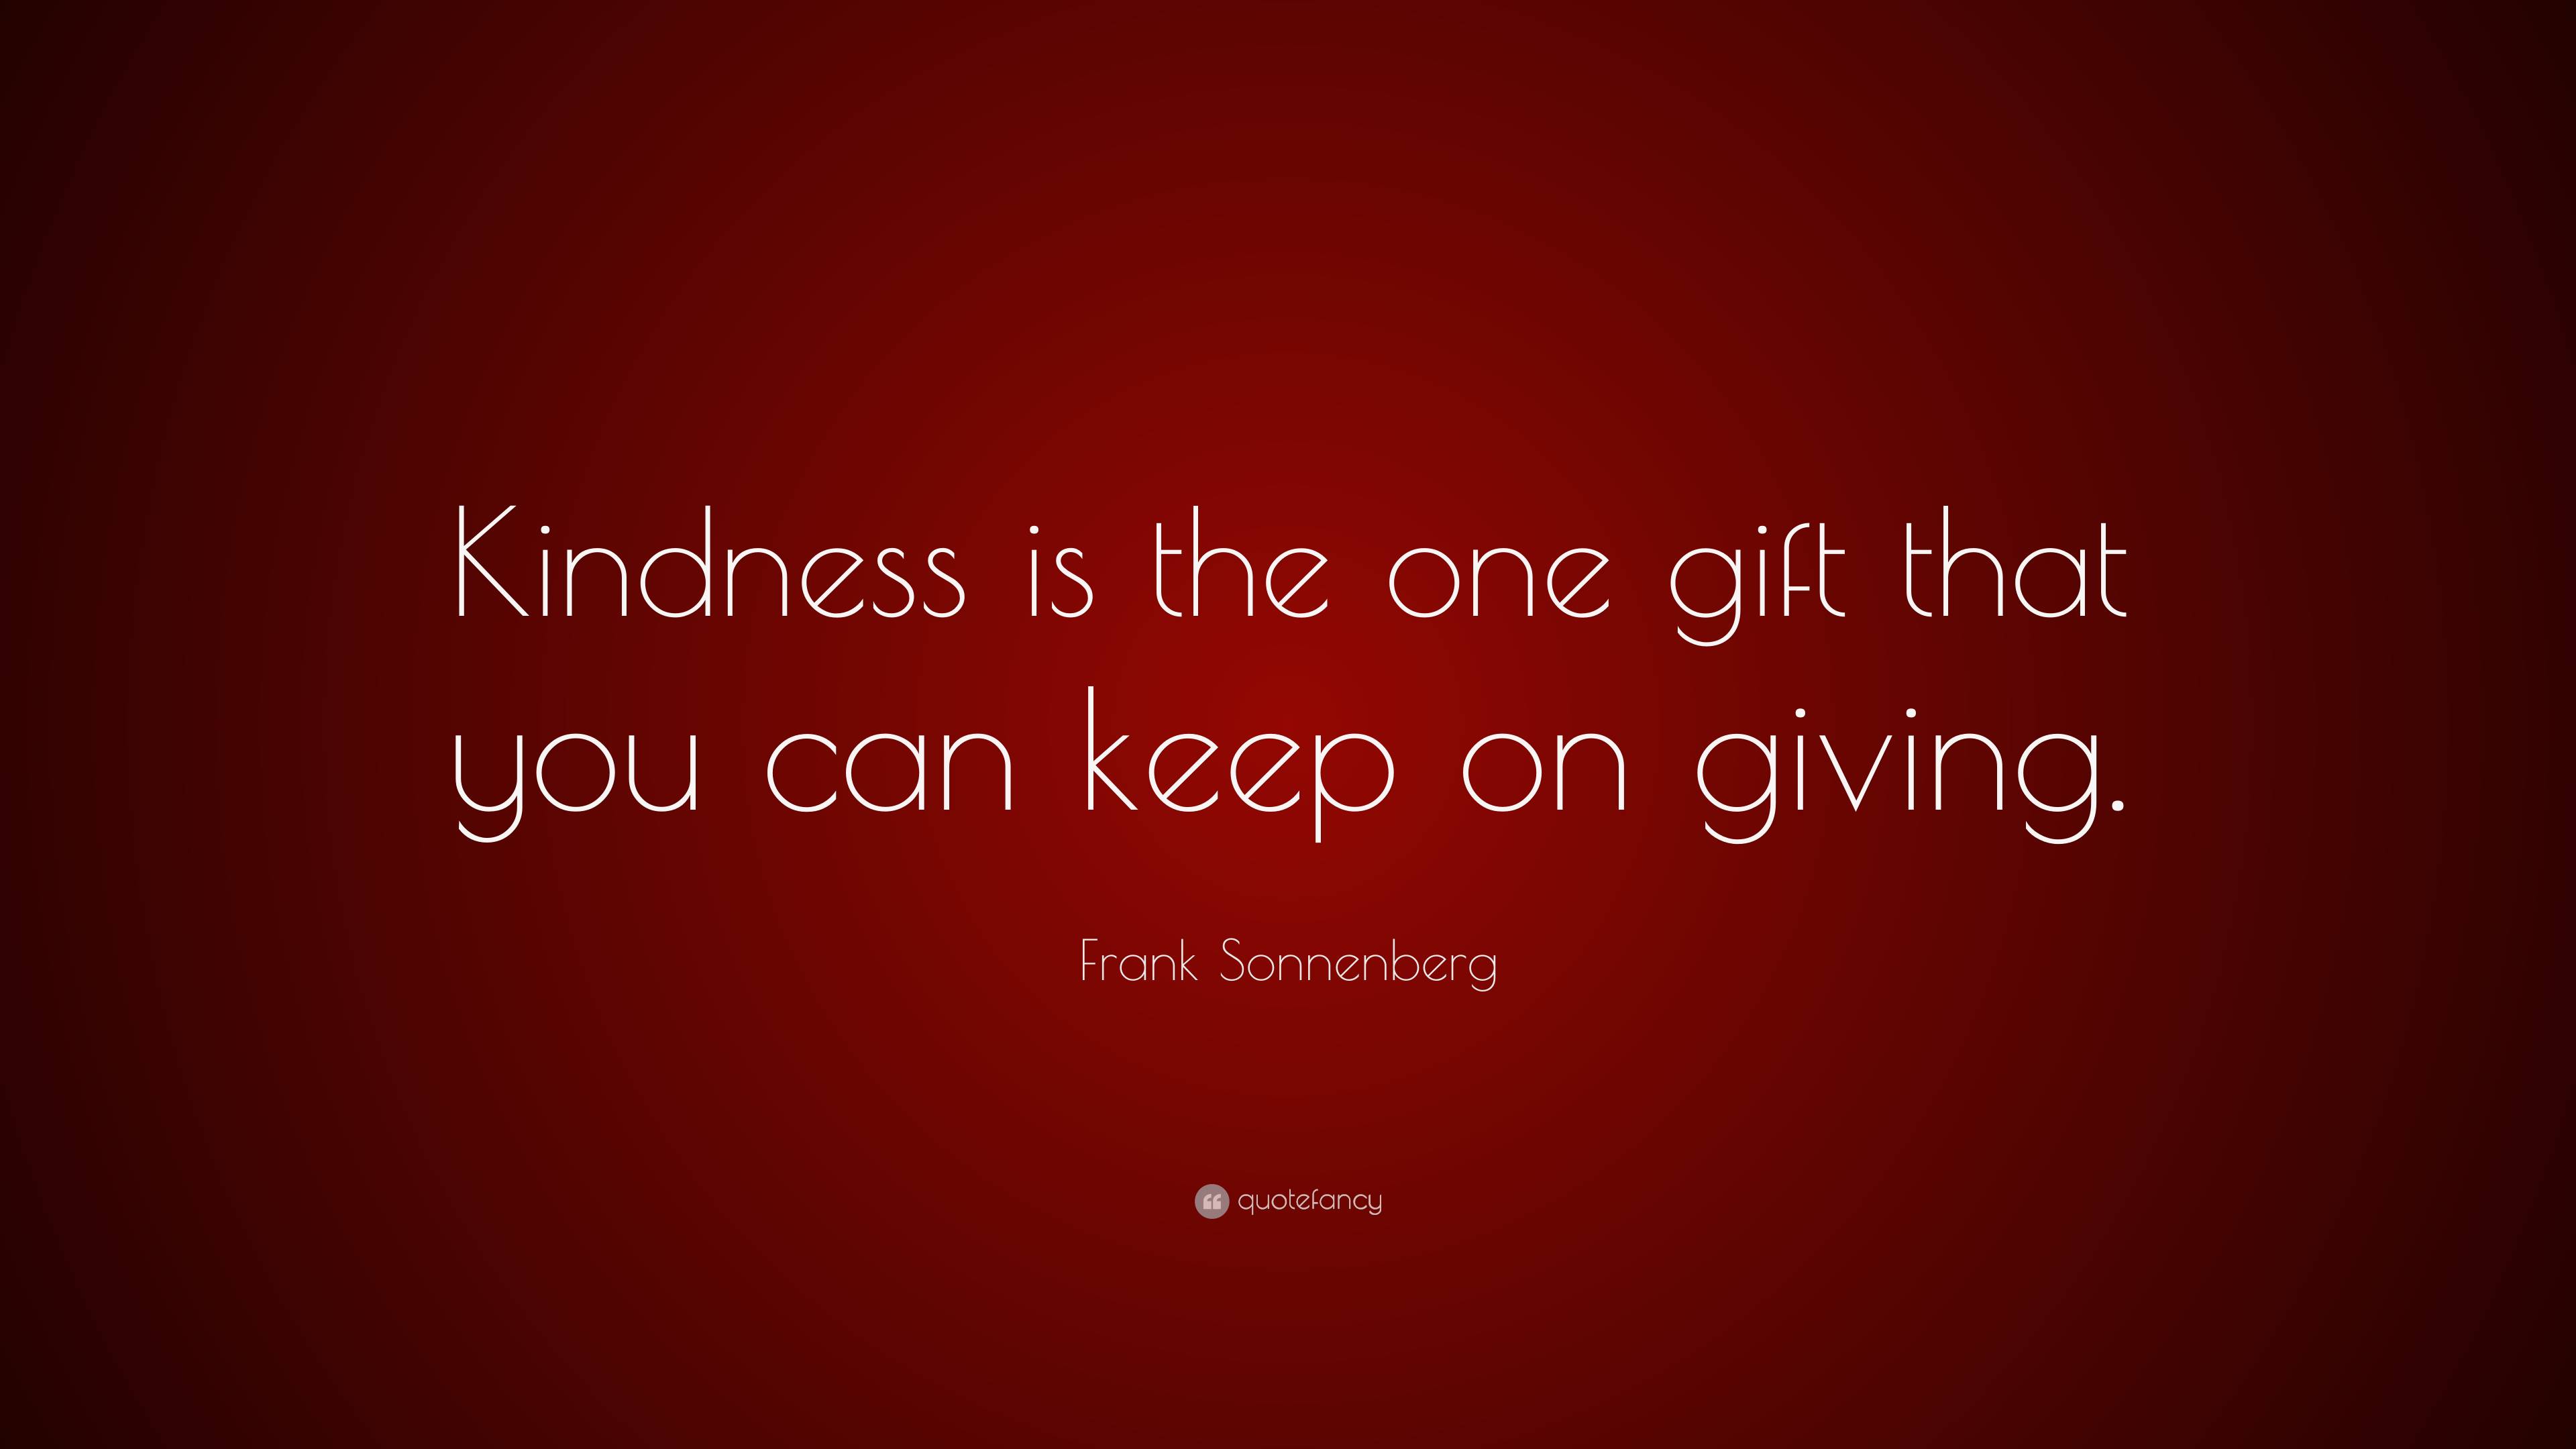 Inspiring Quotes About Gifts and Giving